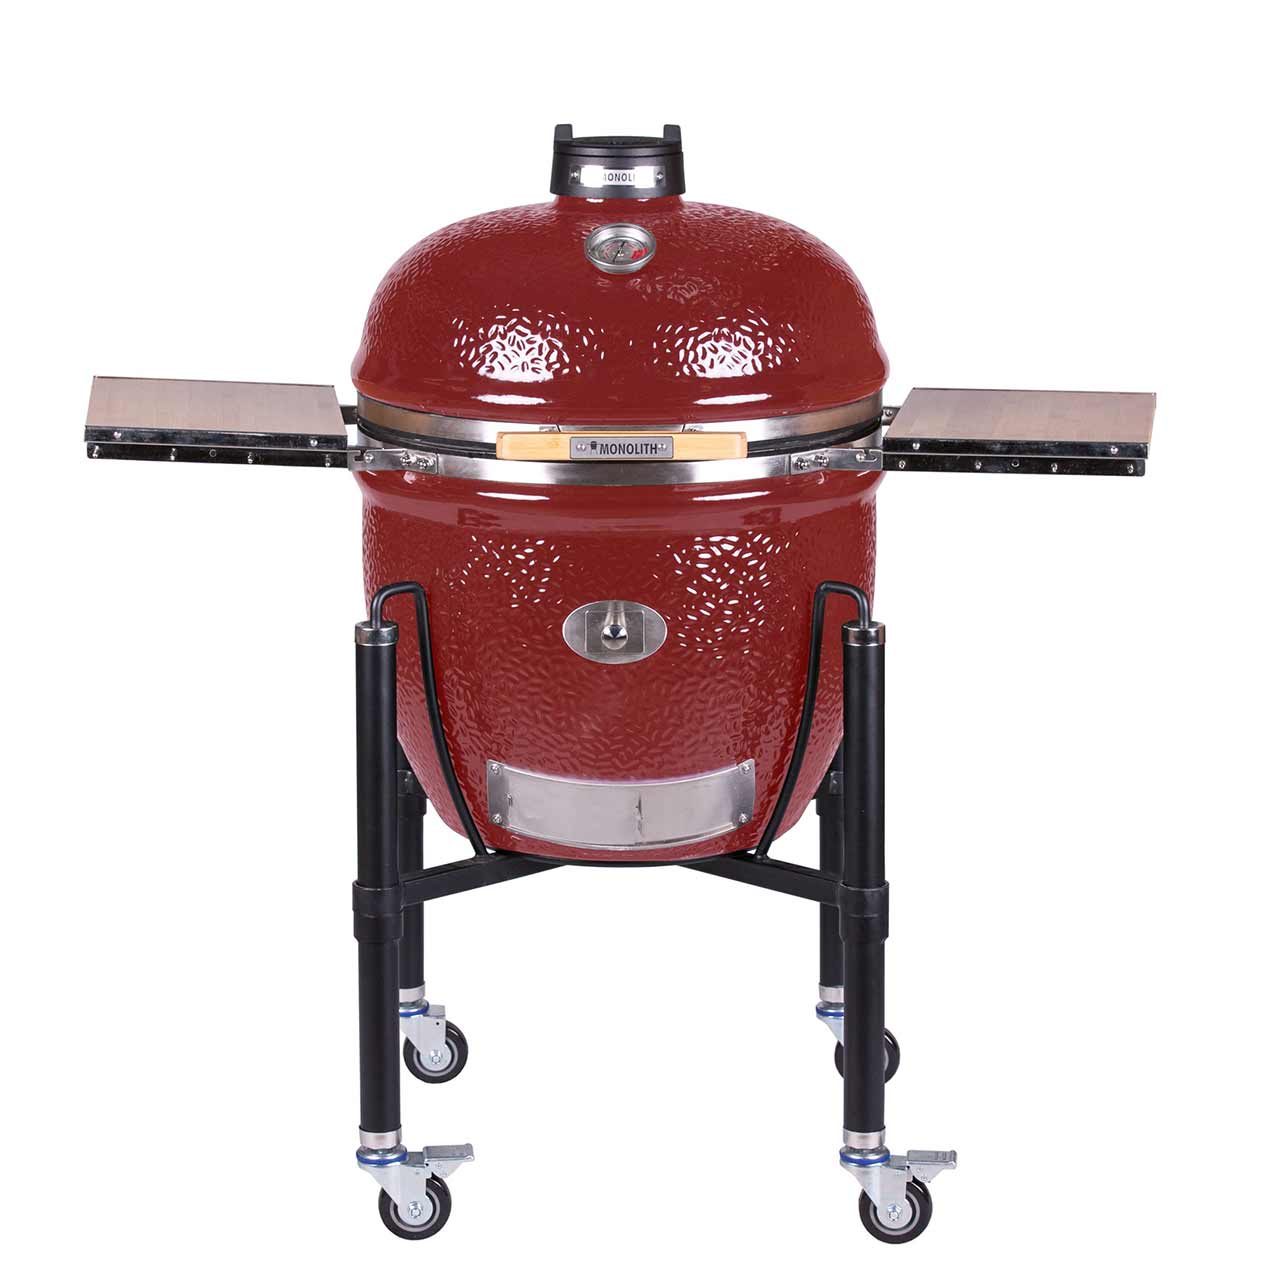 Monolith Kamado Grill LeChef Pro-Serie 2.0 – RED mit Gestell